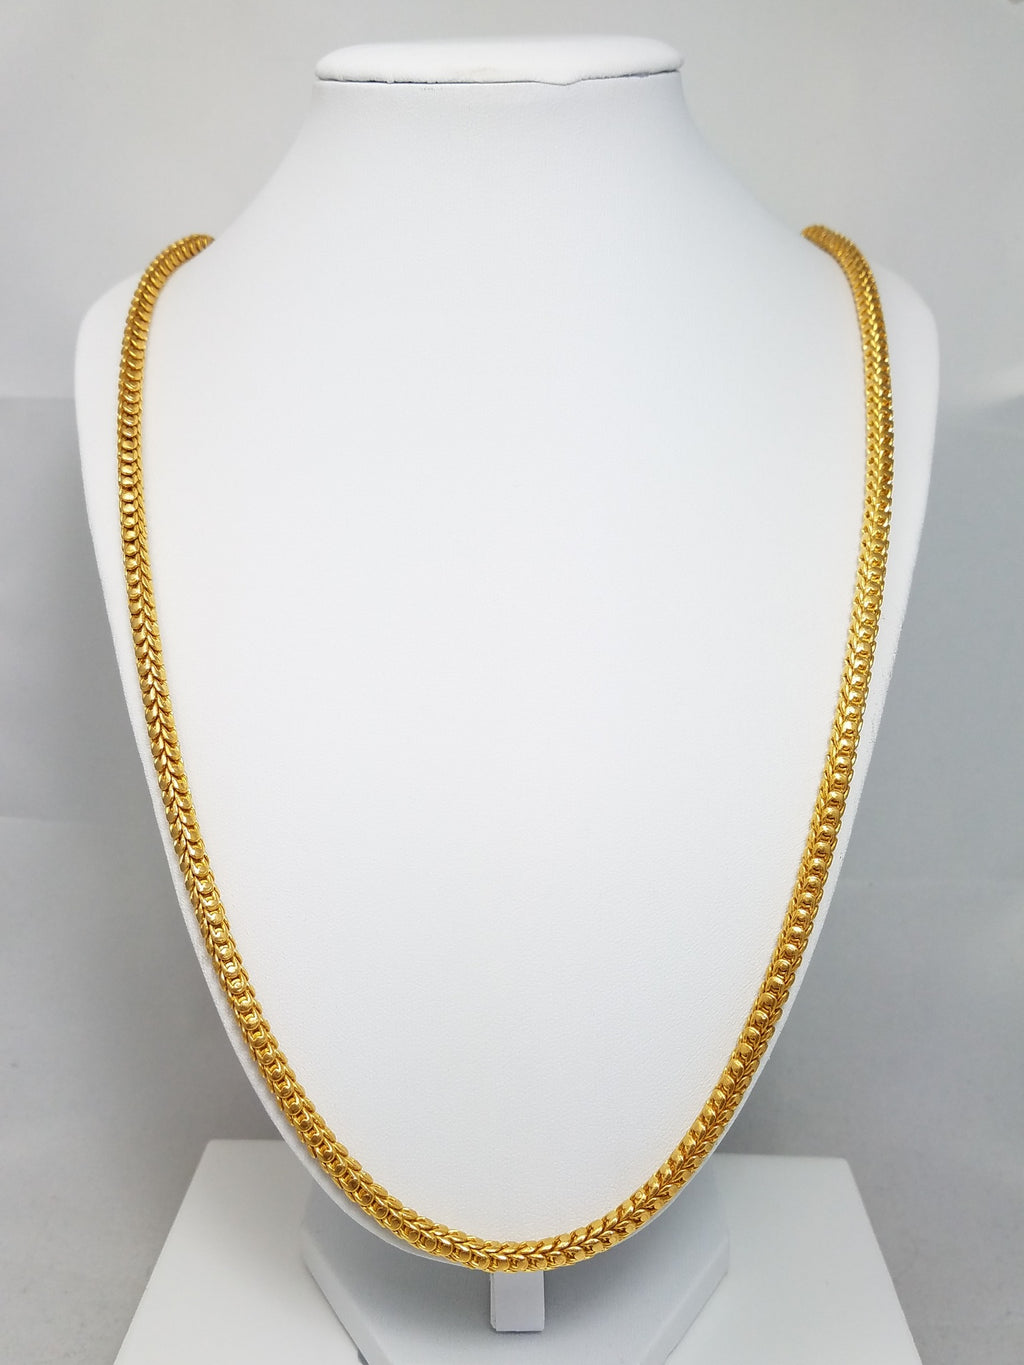 Stunning 27" Solid 23k+ Fancy Link Chain Necklace